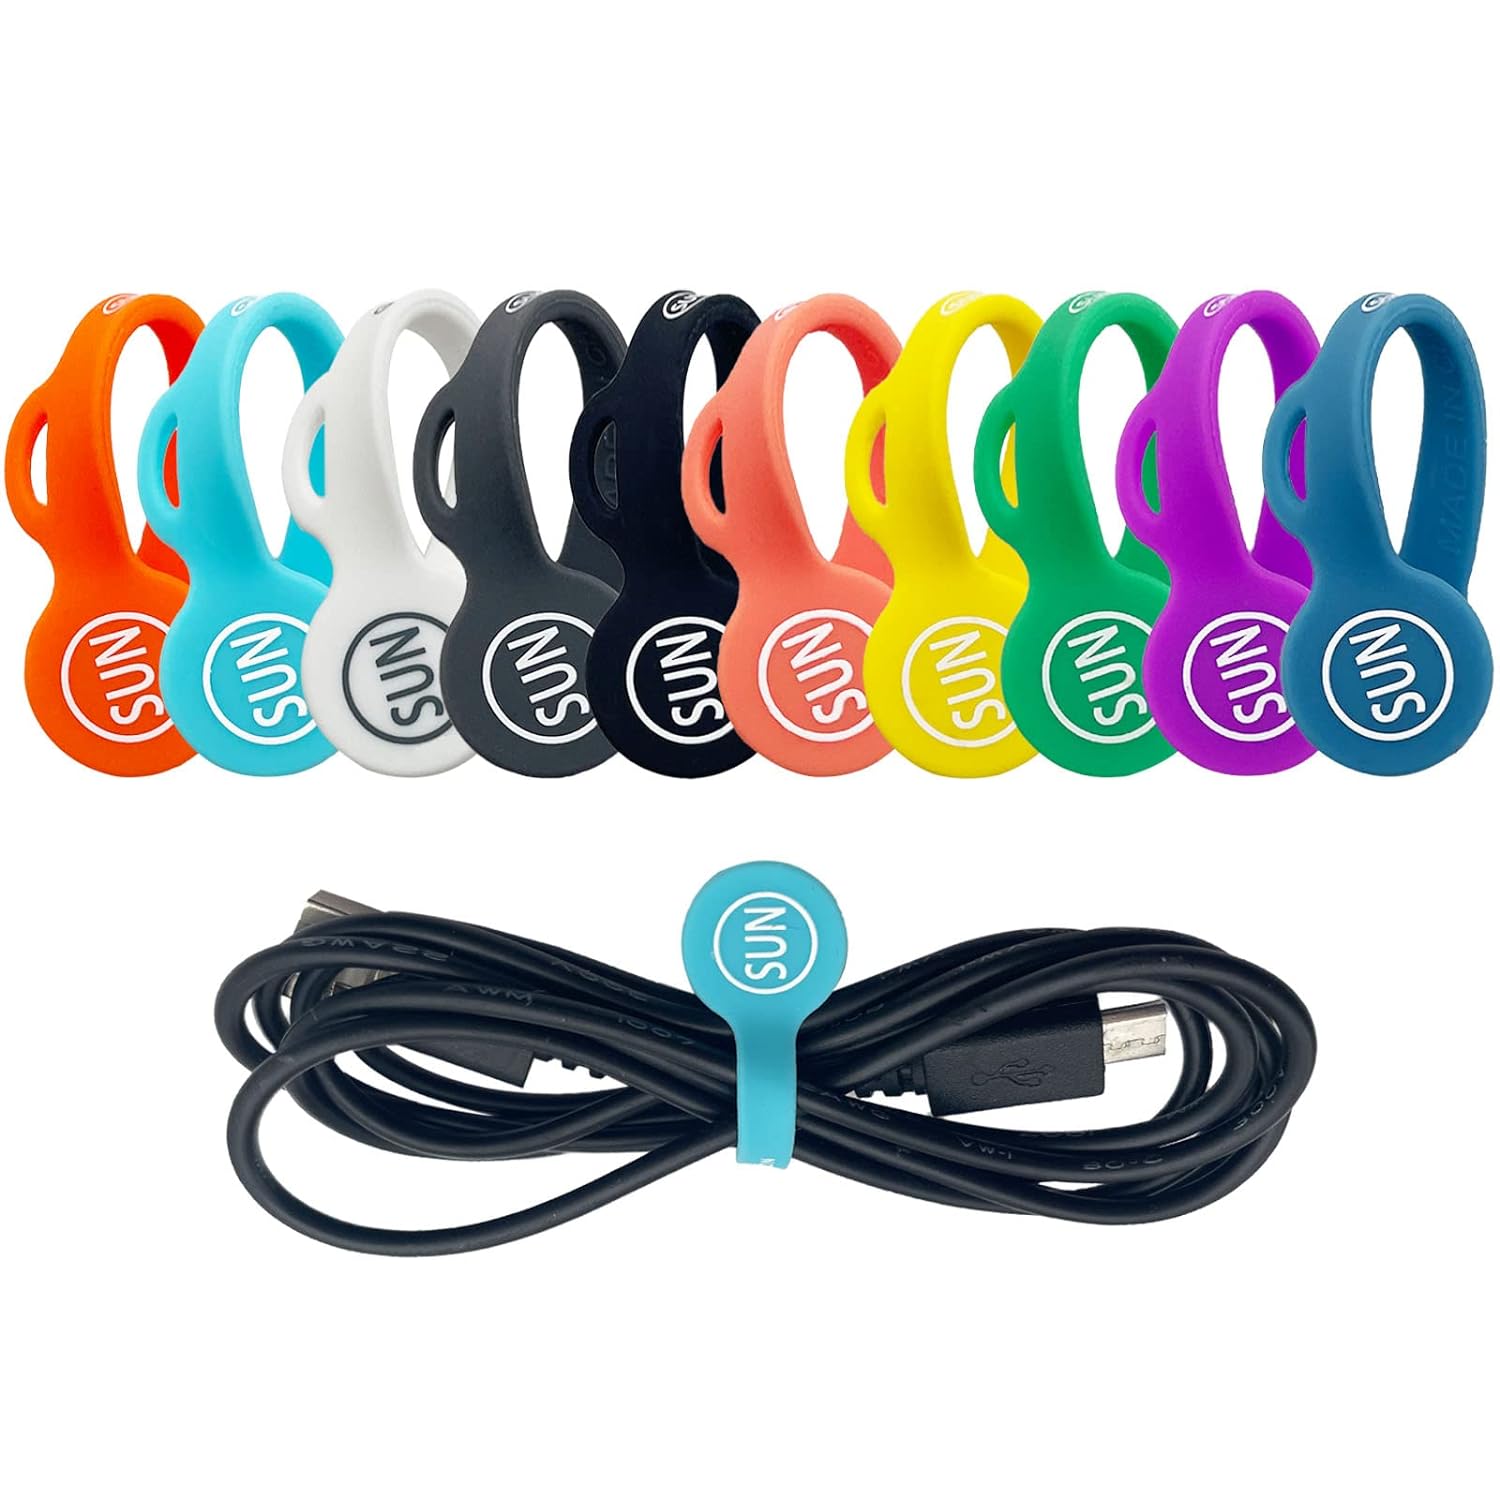 SUNFICON 10 Pack Cable Clips Organizers Earbuds Cords Organizers Magnetic Twist Ties Bookmark Whiteboard Noticeboard Fridge Magnets Cable Manager Keeper for Kitchen Office School Assorted Colors